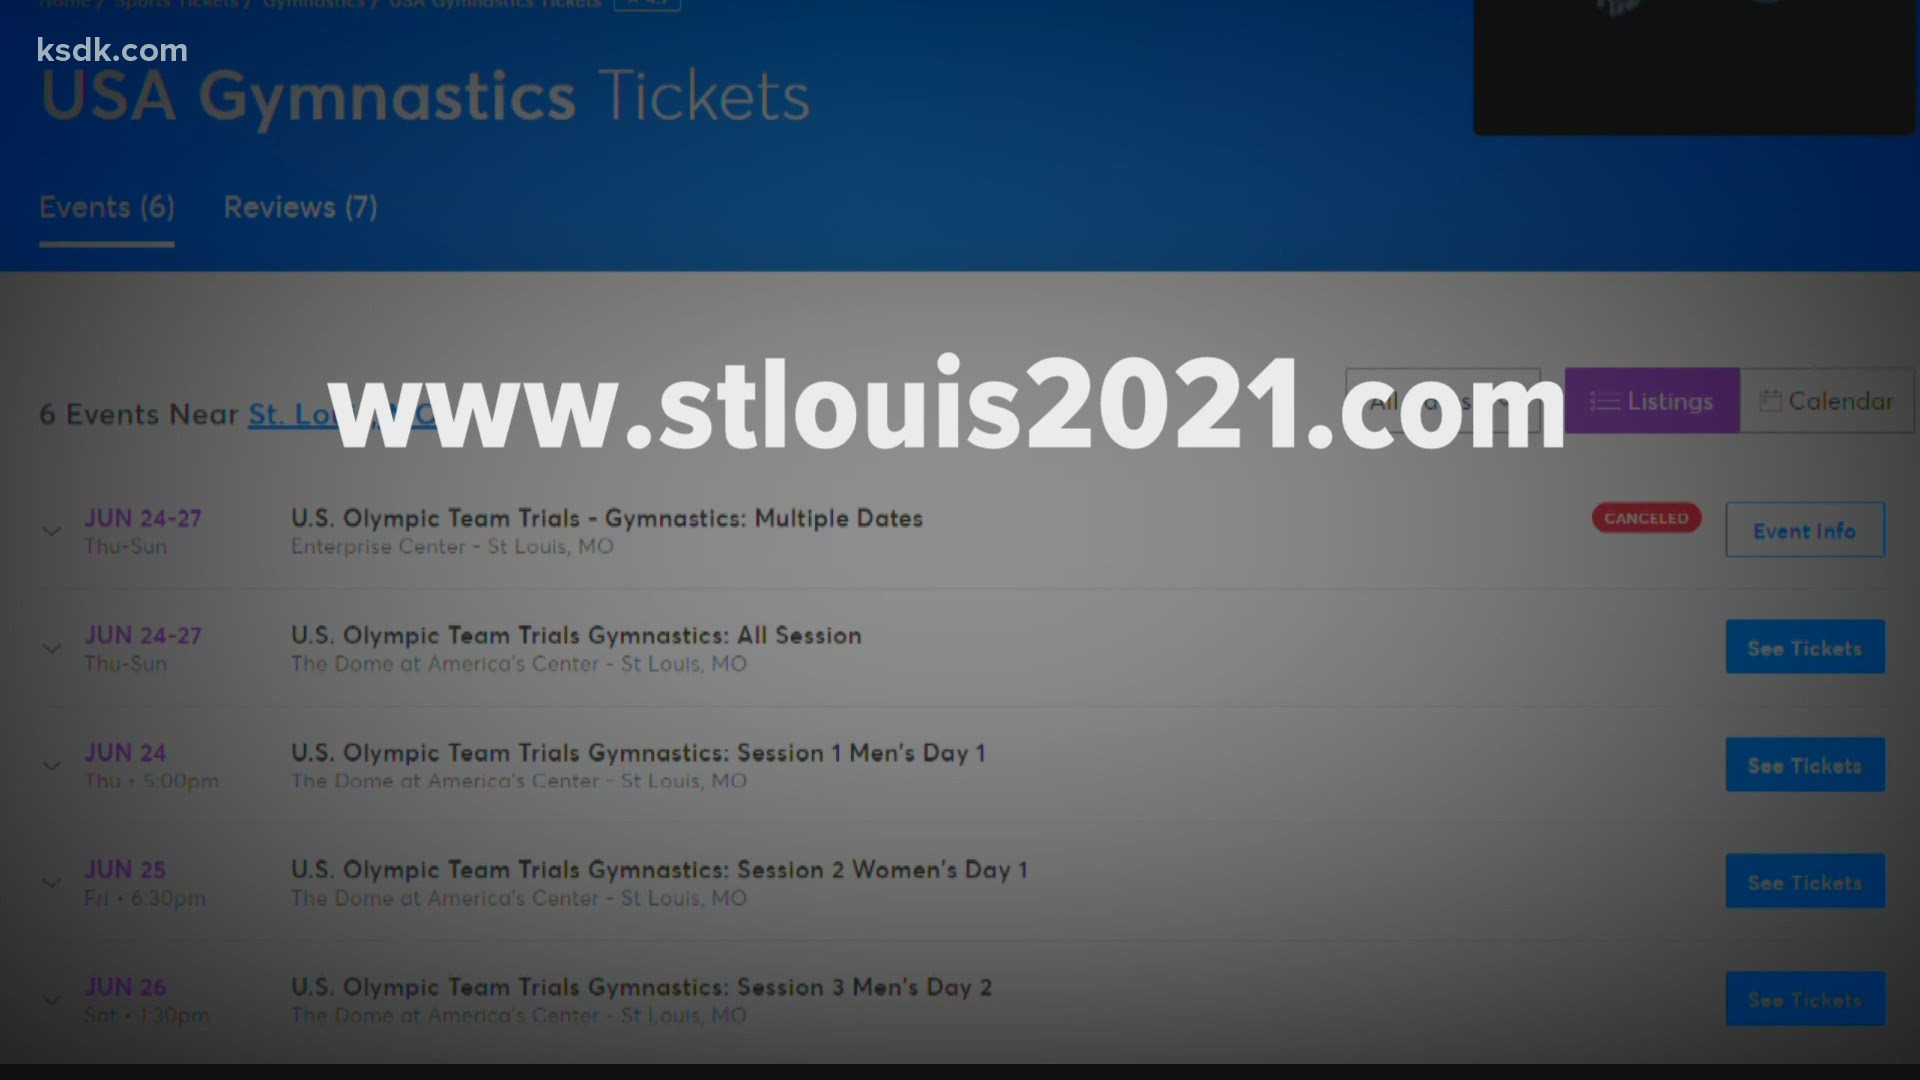 I-Team warns of online impostor selling Olympic trials tickets. This site, www.stlouis2021.com, is the real deal.